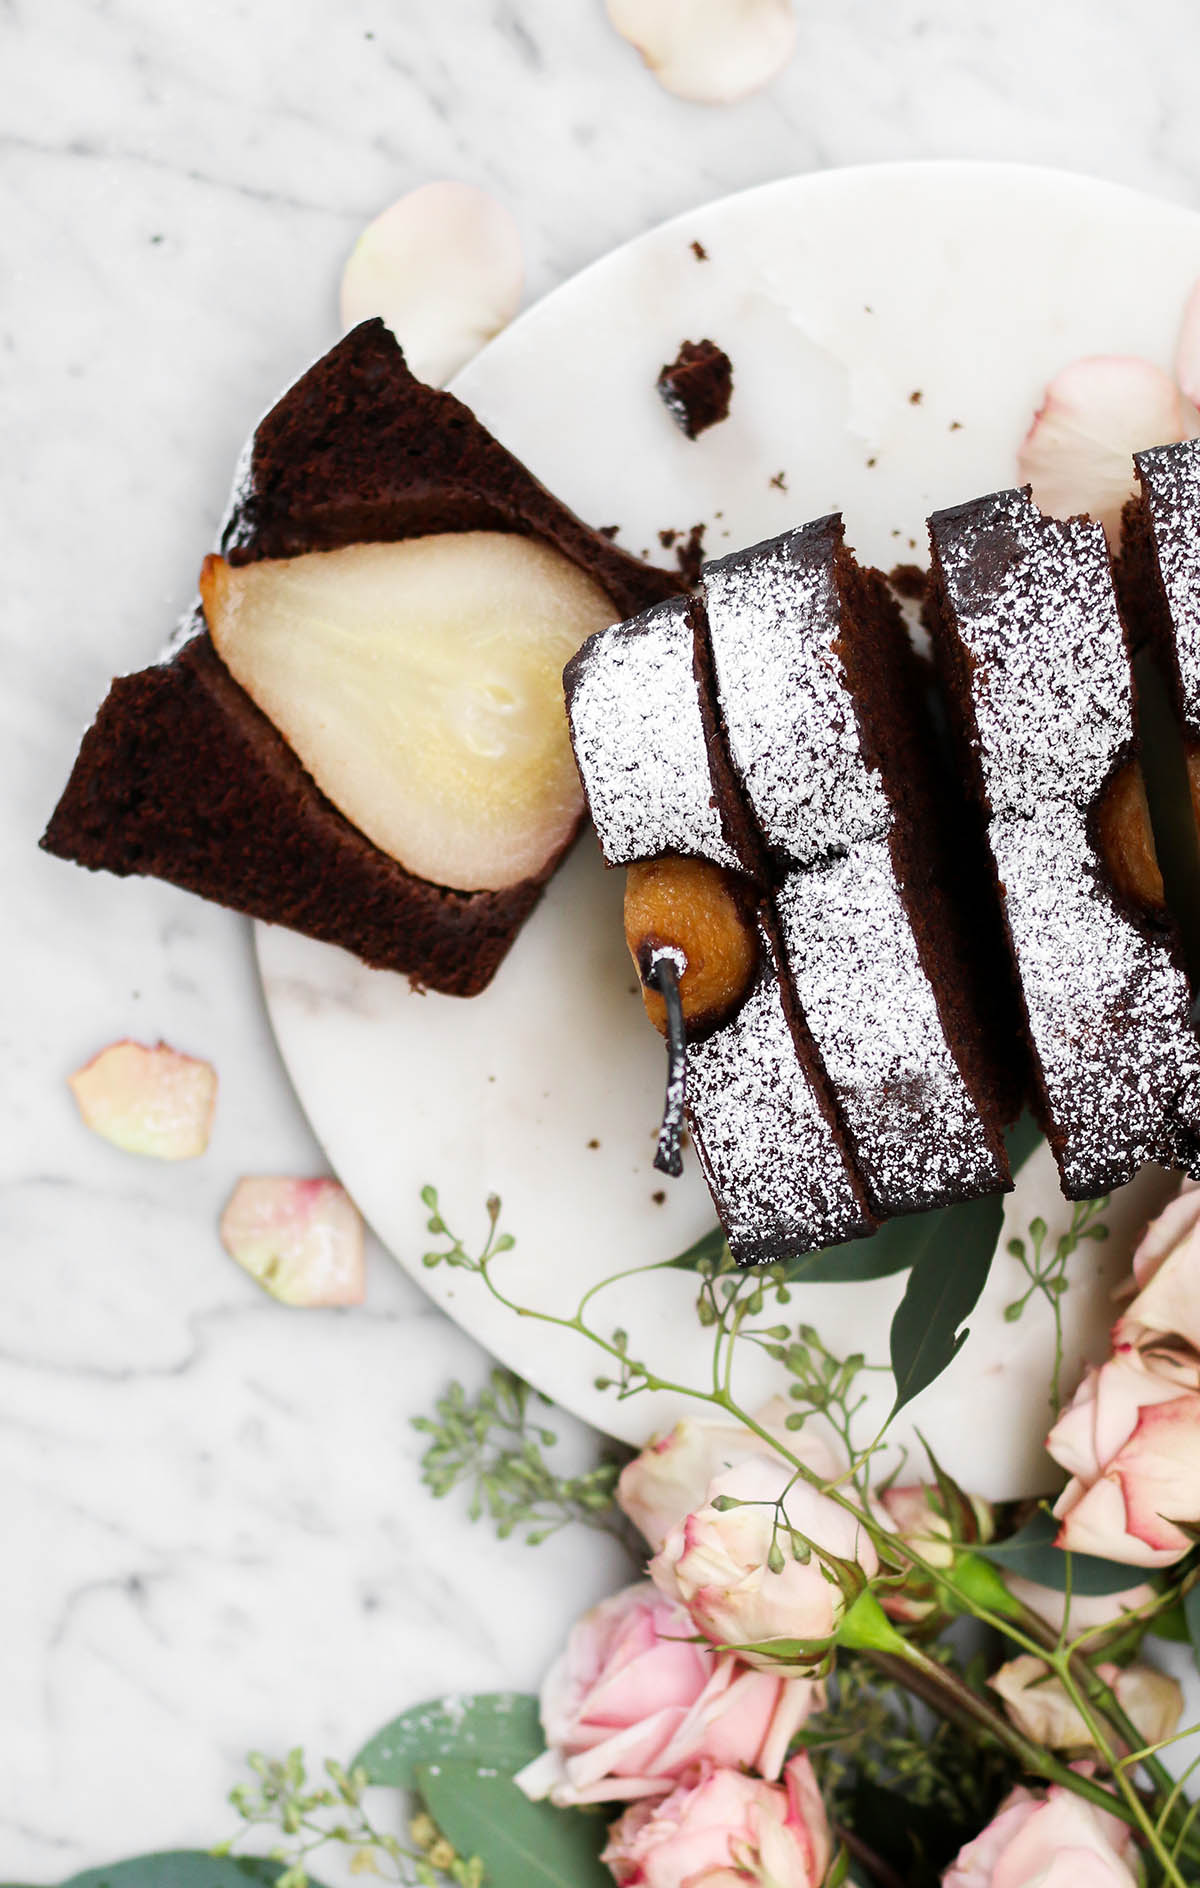 A sliced chocolate loaf cake with pears on a white plate with light pink roses nearby.